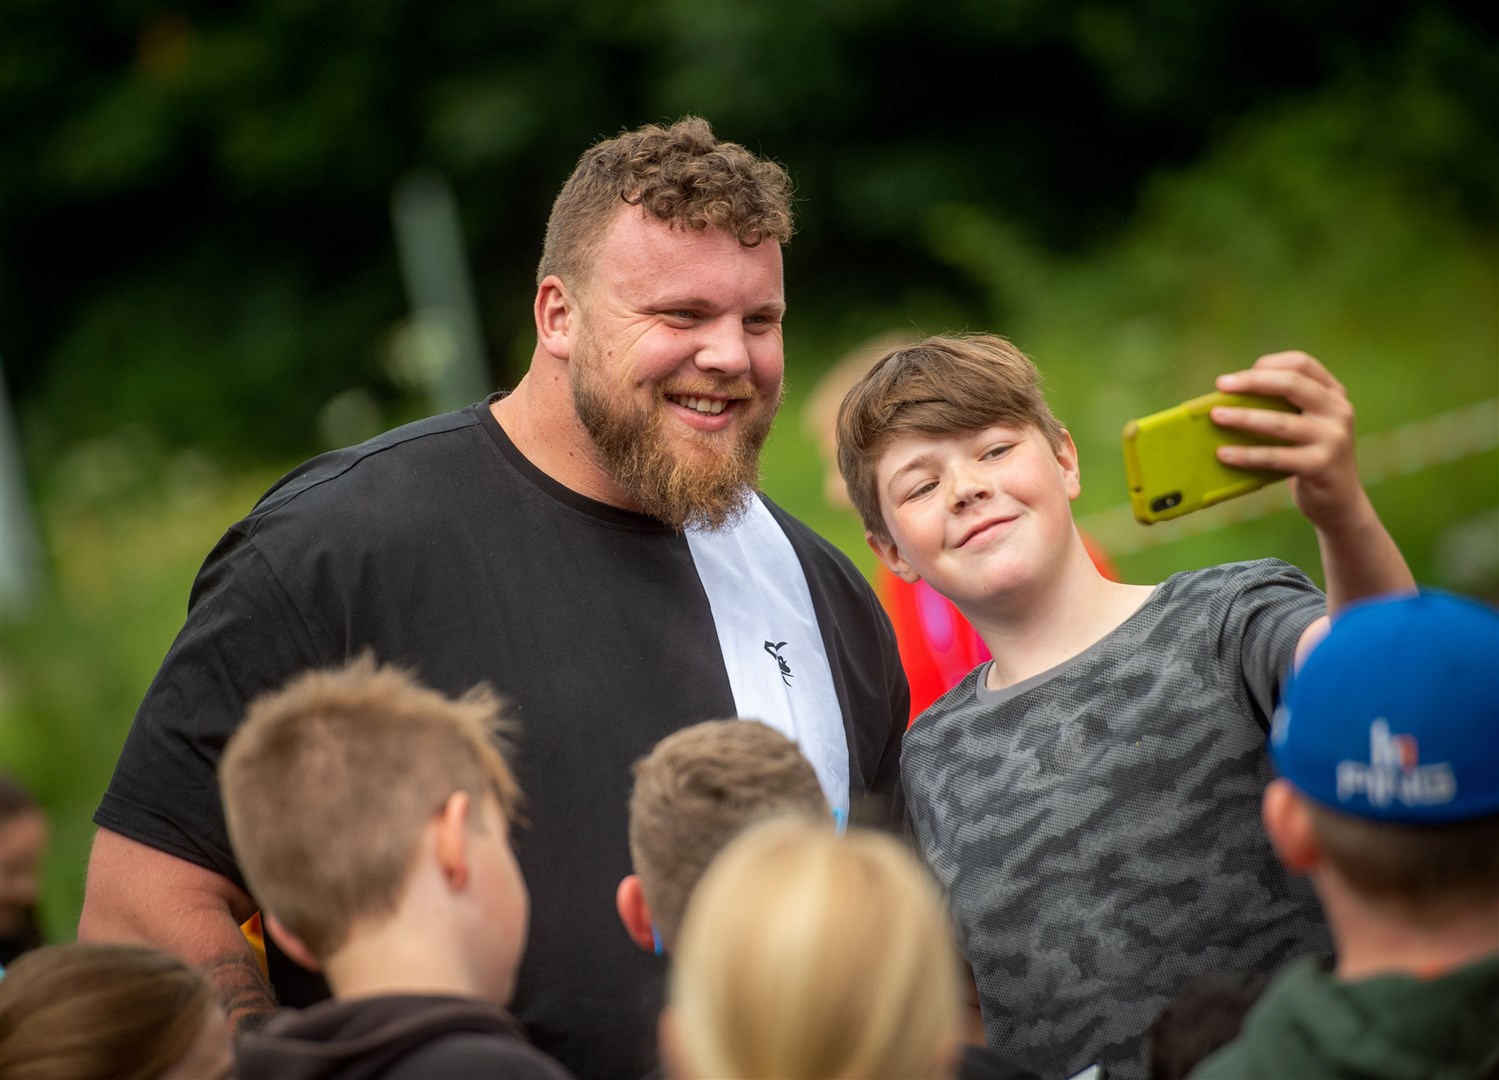 Harry Urquhart grabs a selfie with the World’s Strongest Man, Tom Stoltman, during one of his visits to The Field in Alness. Picture: Callum Mackay